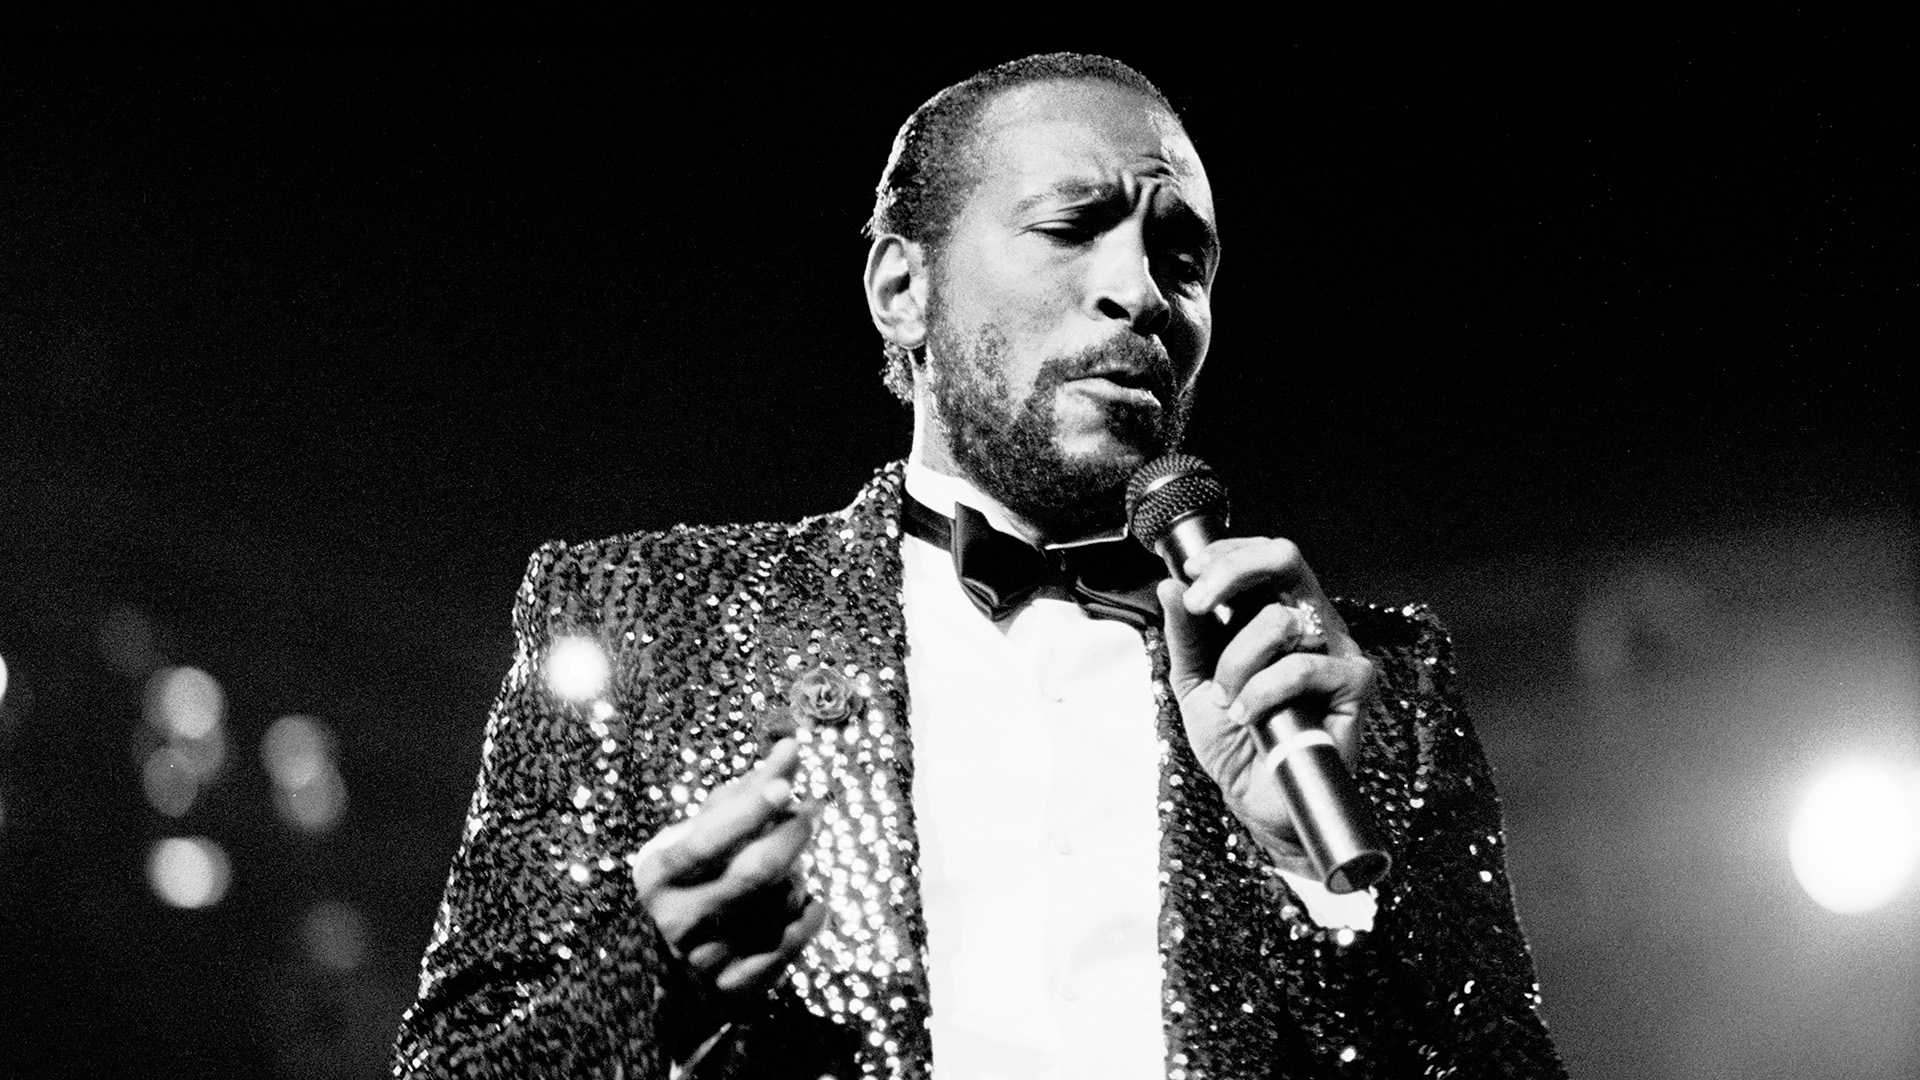 American R&B, Funk, and Soul musician Marvin Gaye (1939 - 1984) performs onstage during the 'Sexual Healing' tour at Radio City Music Hall, New York, New York, May 19, 1983.